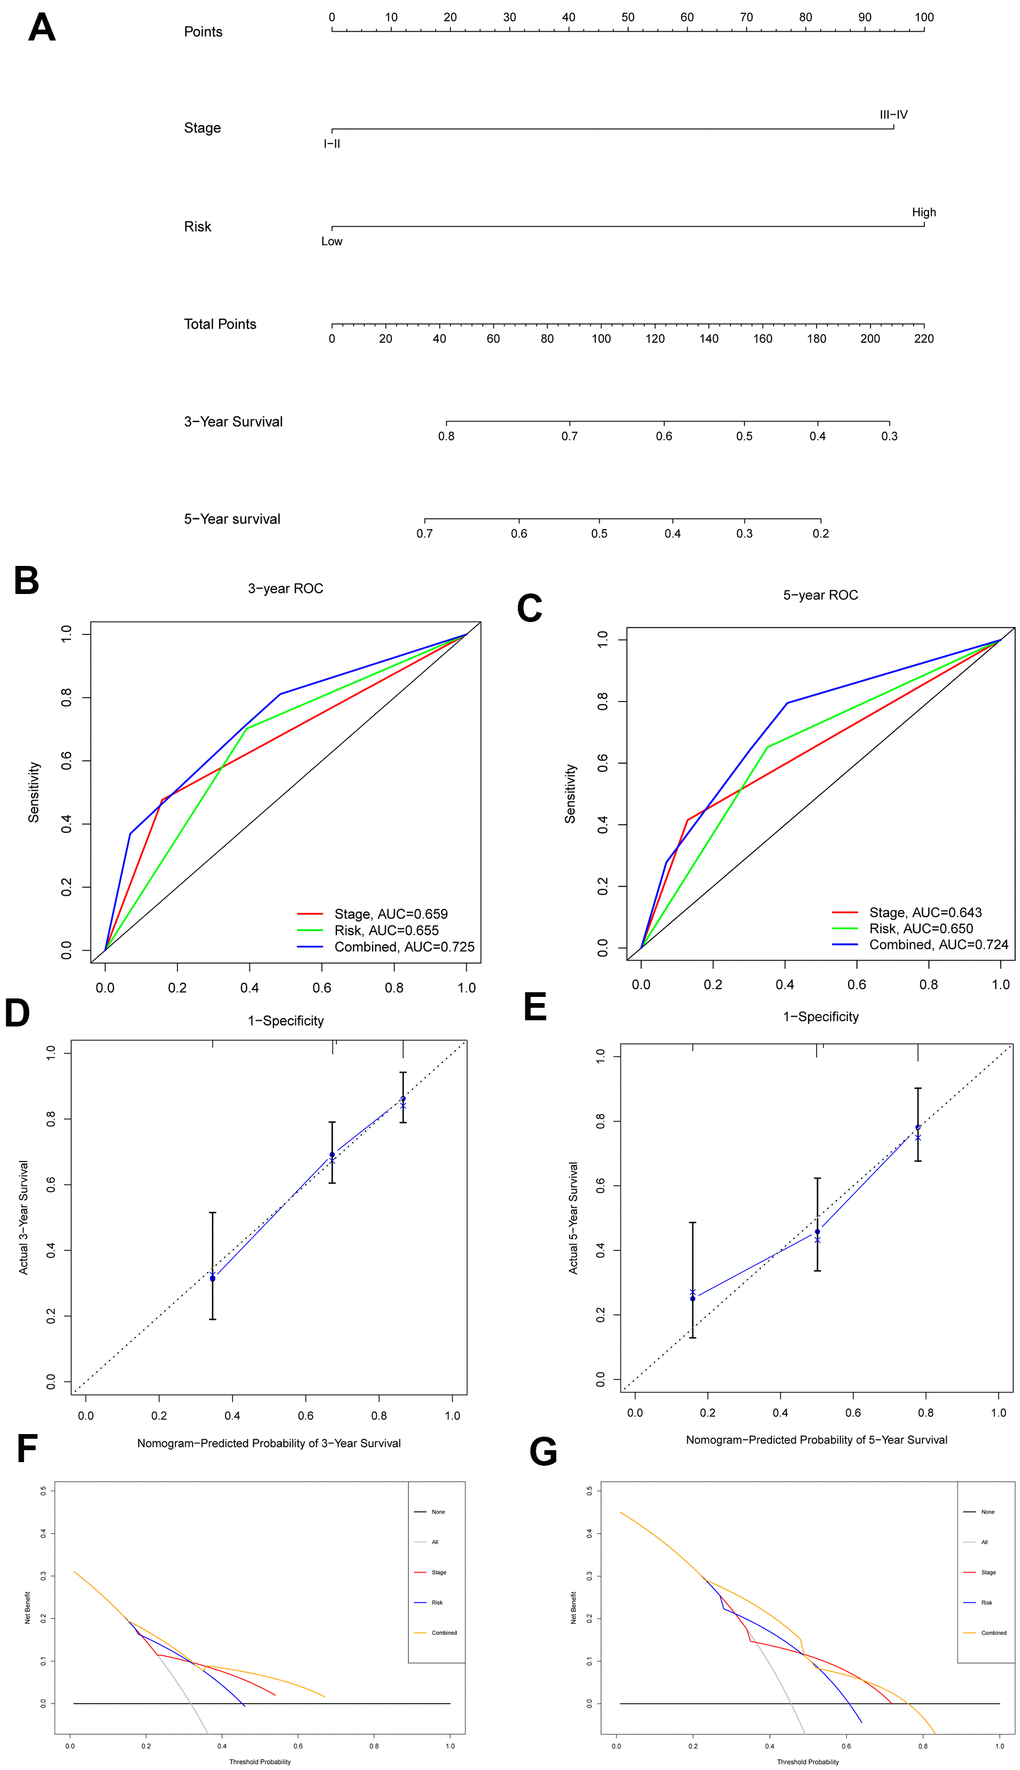 Nomogram to predict 3- and 5- year OS and its validation in HCC patients. (A) Nomogram to predict 3- and 5- year OS of HCC patients. (B, C) ROC curves to assess the accuracy of nomogram to predict 3- and 5- year OS in HCC patients. (D, E) Calibration plot analysis to assess the accuracy of nomogram to predict 3- and 5- year OS in HCC patients. (F, G) DCA to assess the accuracy of nomogram to predict 3- and 5- year OS in HCC patients.